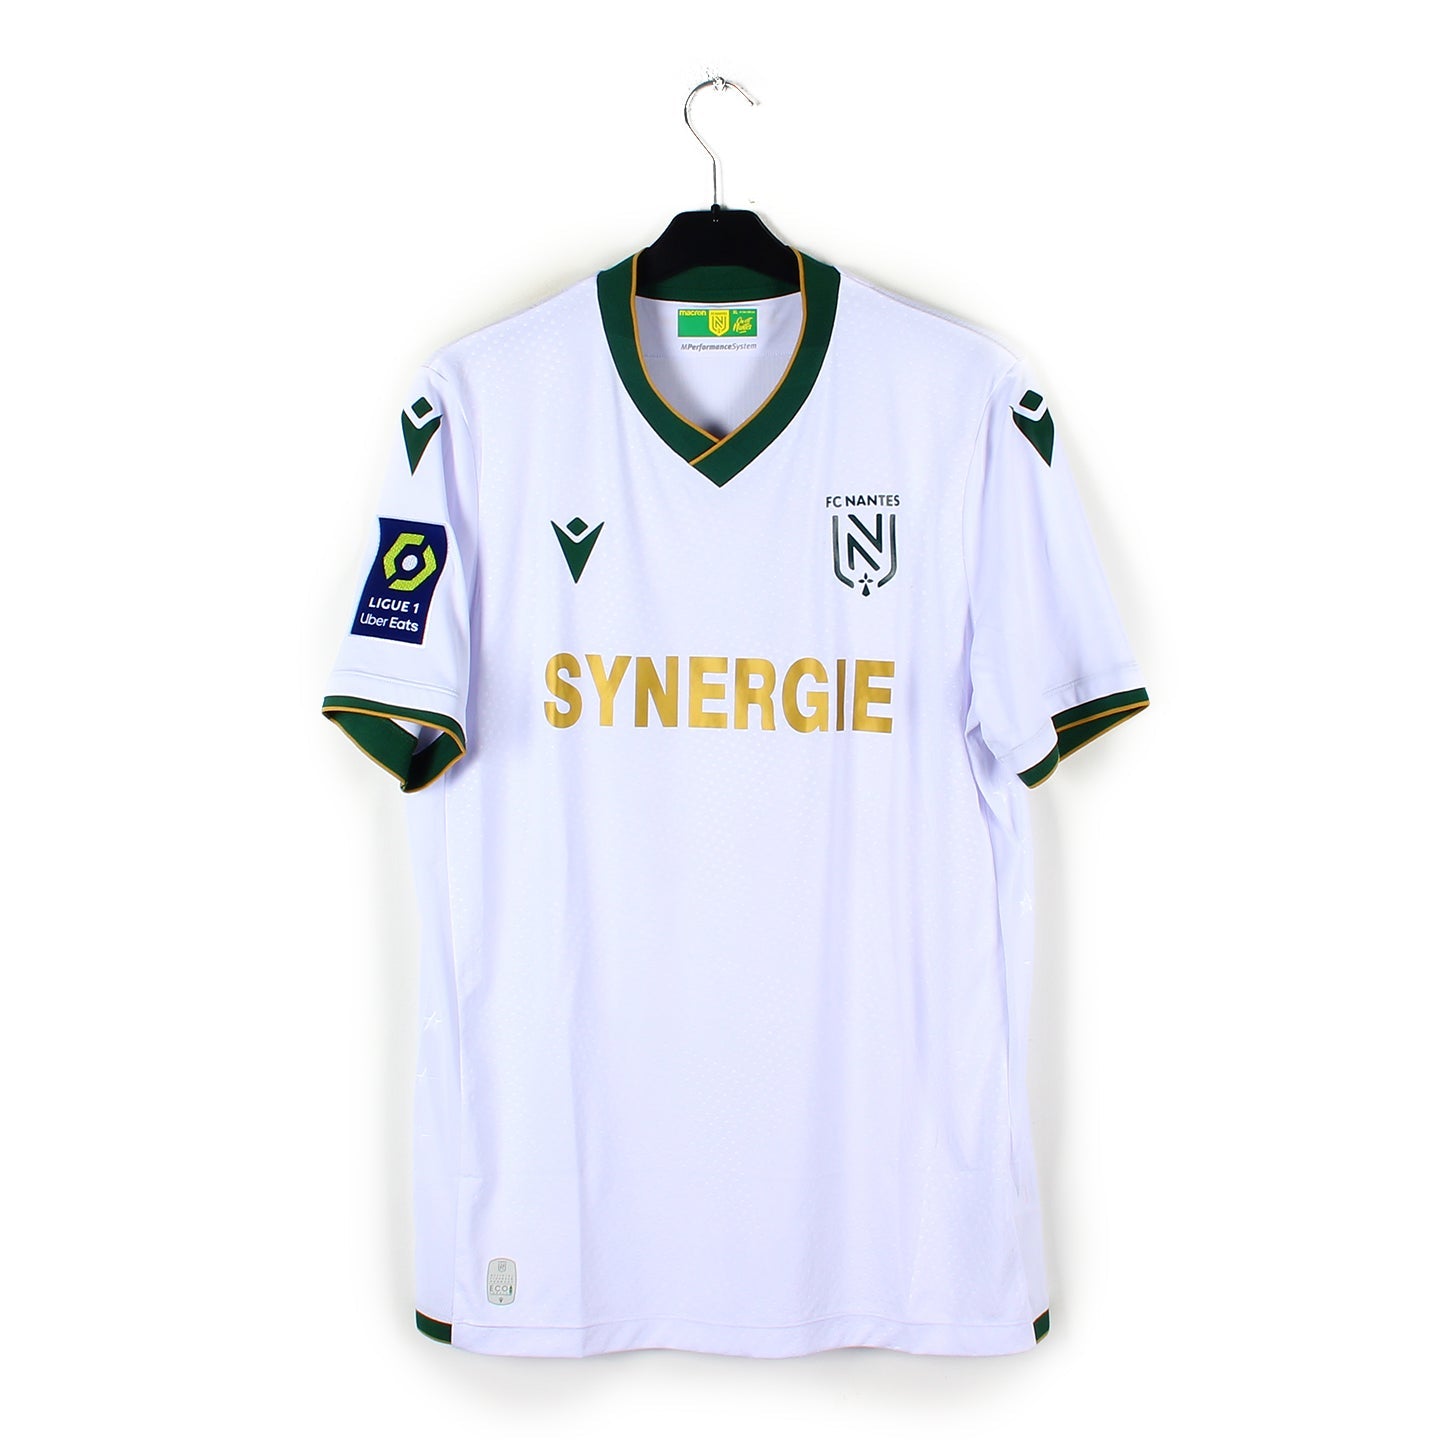 Maillot FCN NANTES Kappa taille XL SYNERGIE - ARGUS FOOT & SPORTS